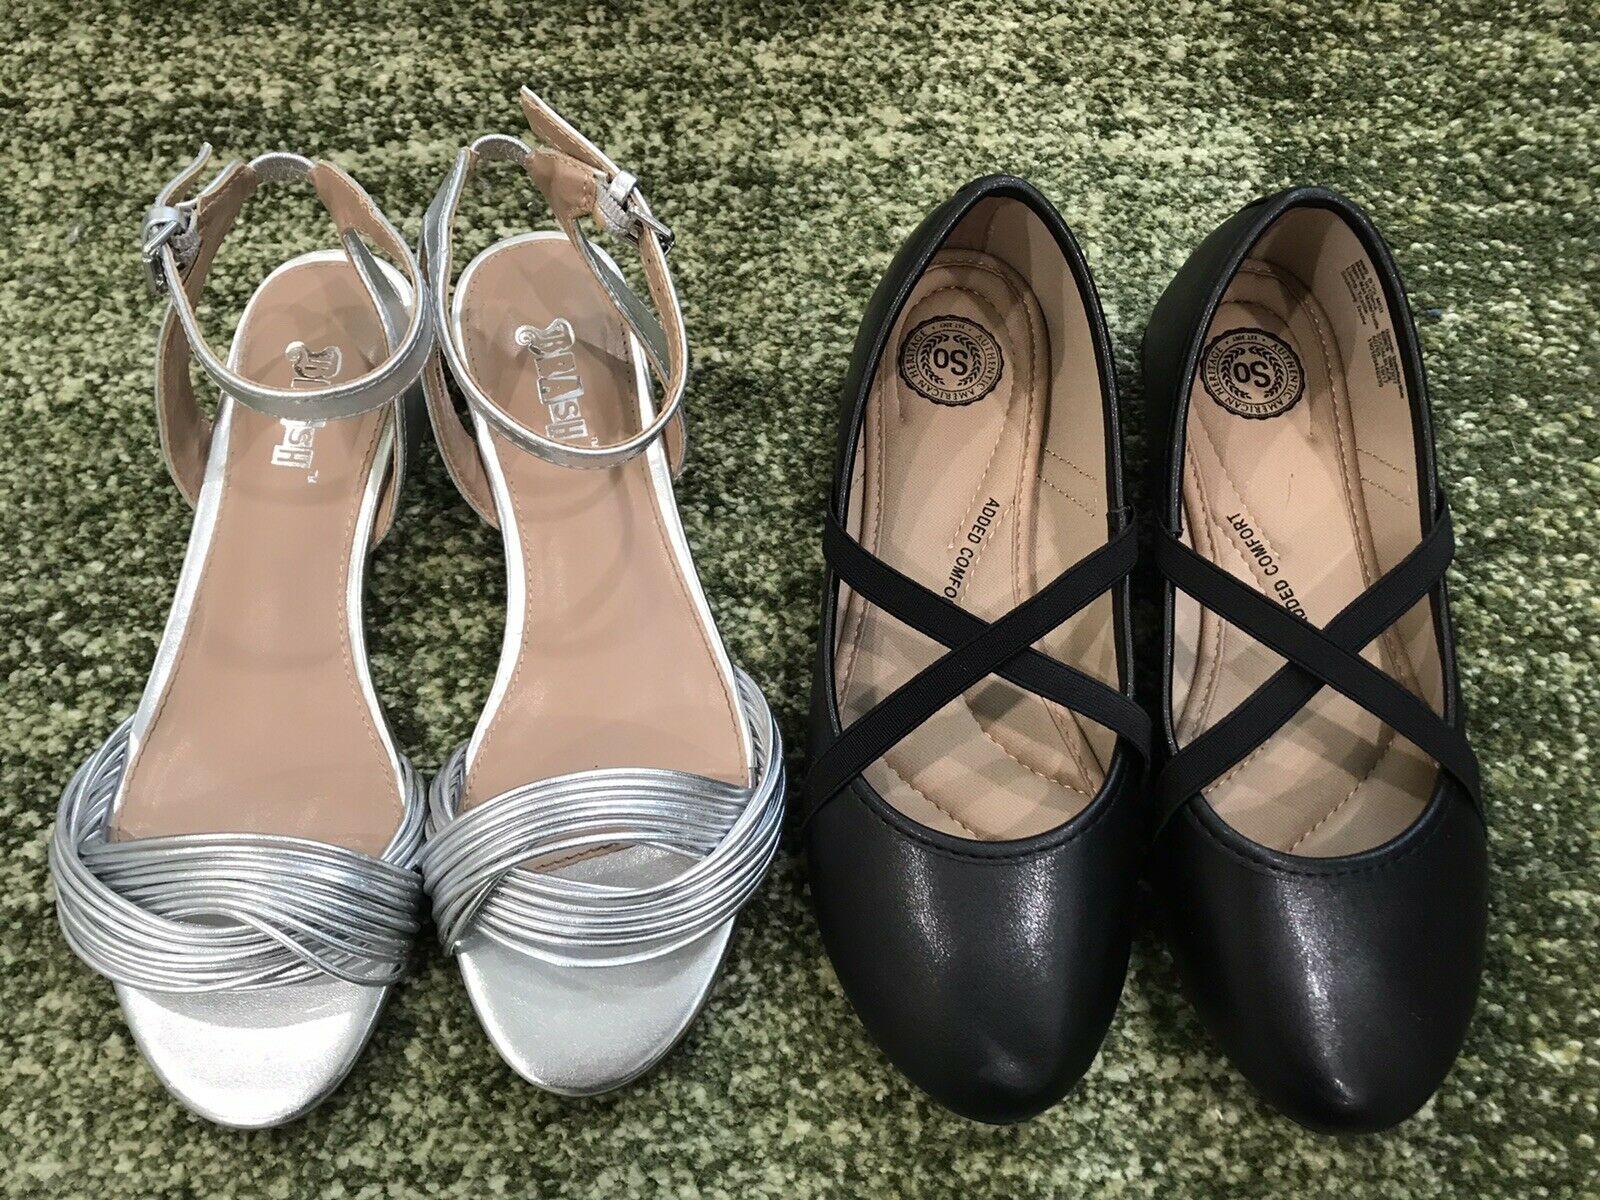 Teen Junior Youth Girl Size 6 6.5 Silver Sandals Black Dress Shoes Lot